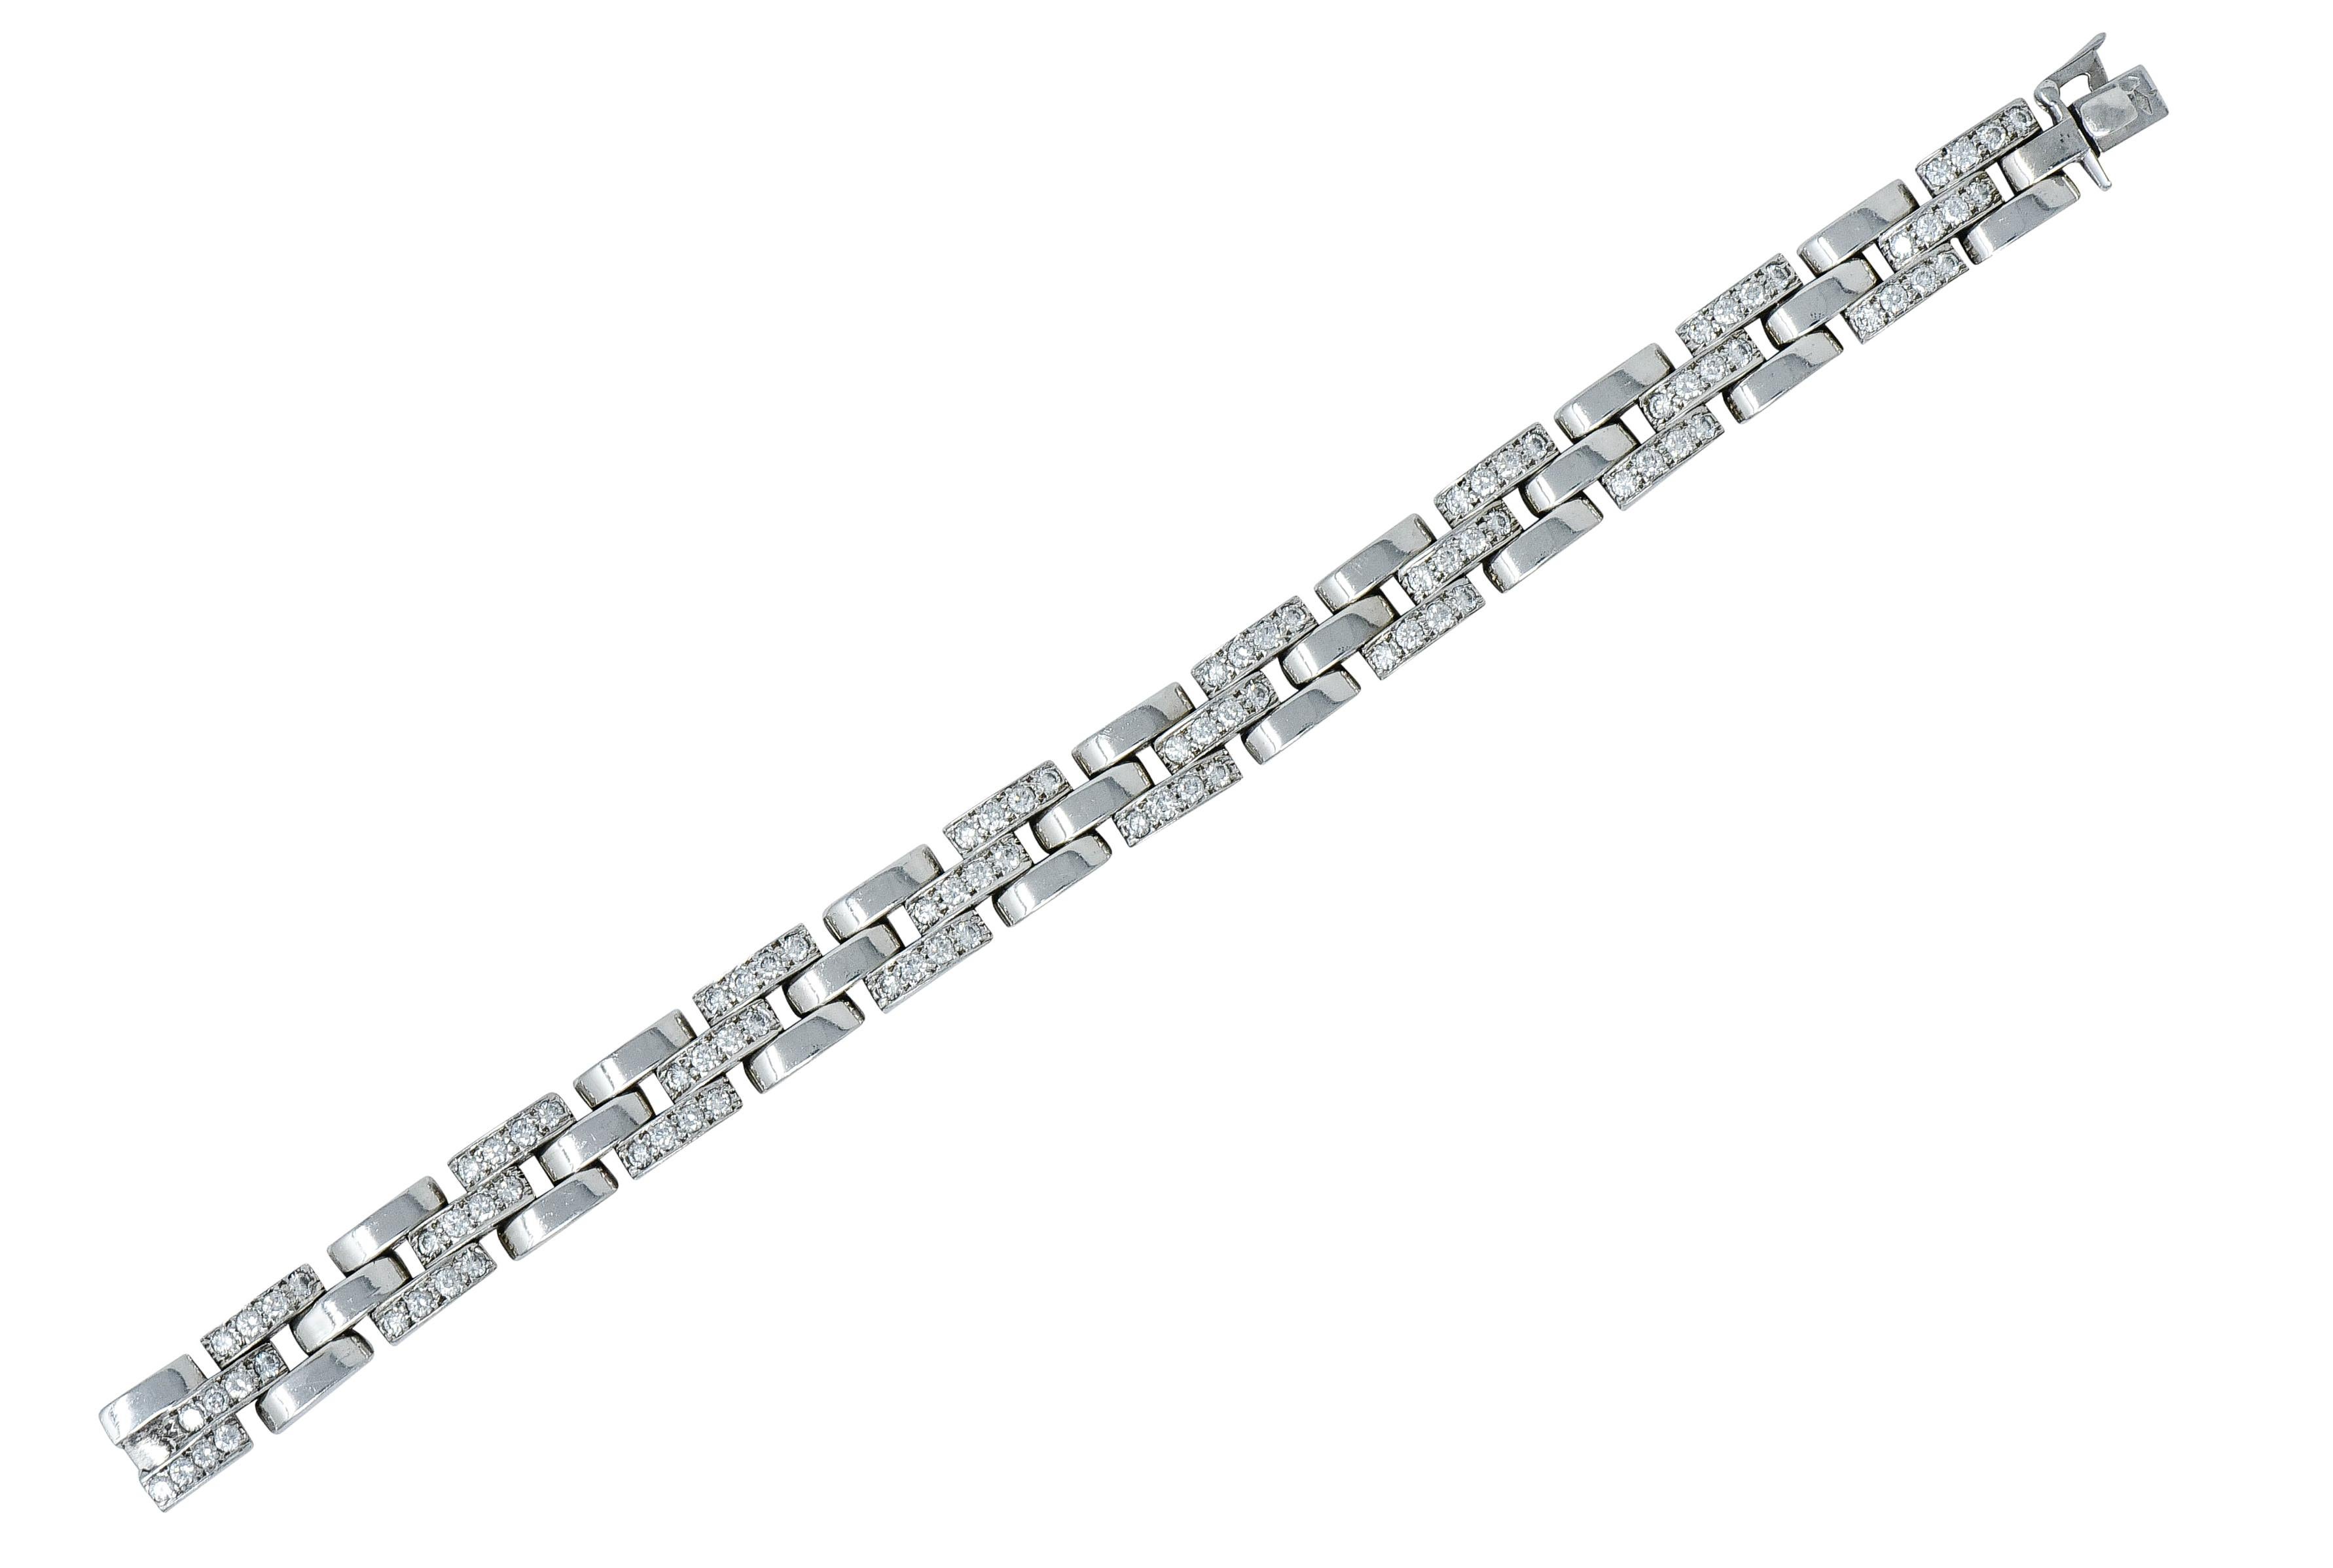 Bracelet is comprised of rectangular cushion links

Alternating smooth polished links with bead set diamond links

Round brilliant cut diamonds weigh approximately 3.36 carat; G/H color with VS clarity

Completed by a concealed clasp and